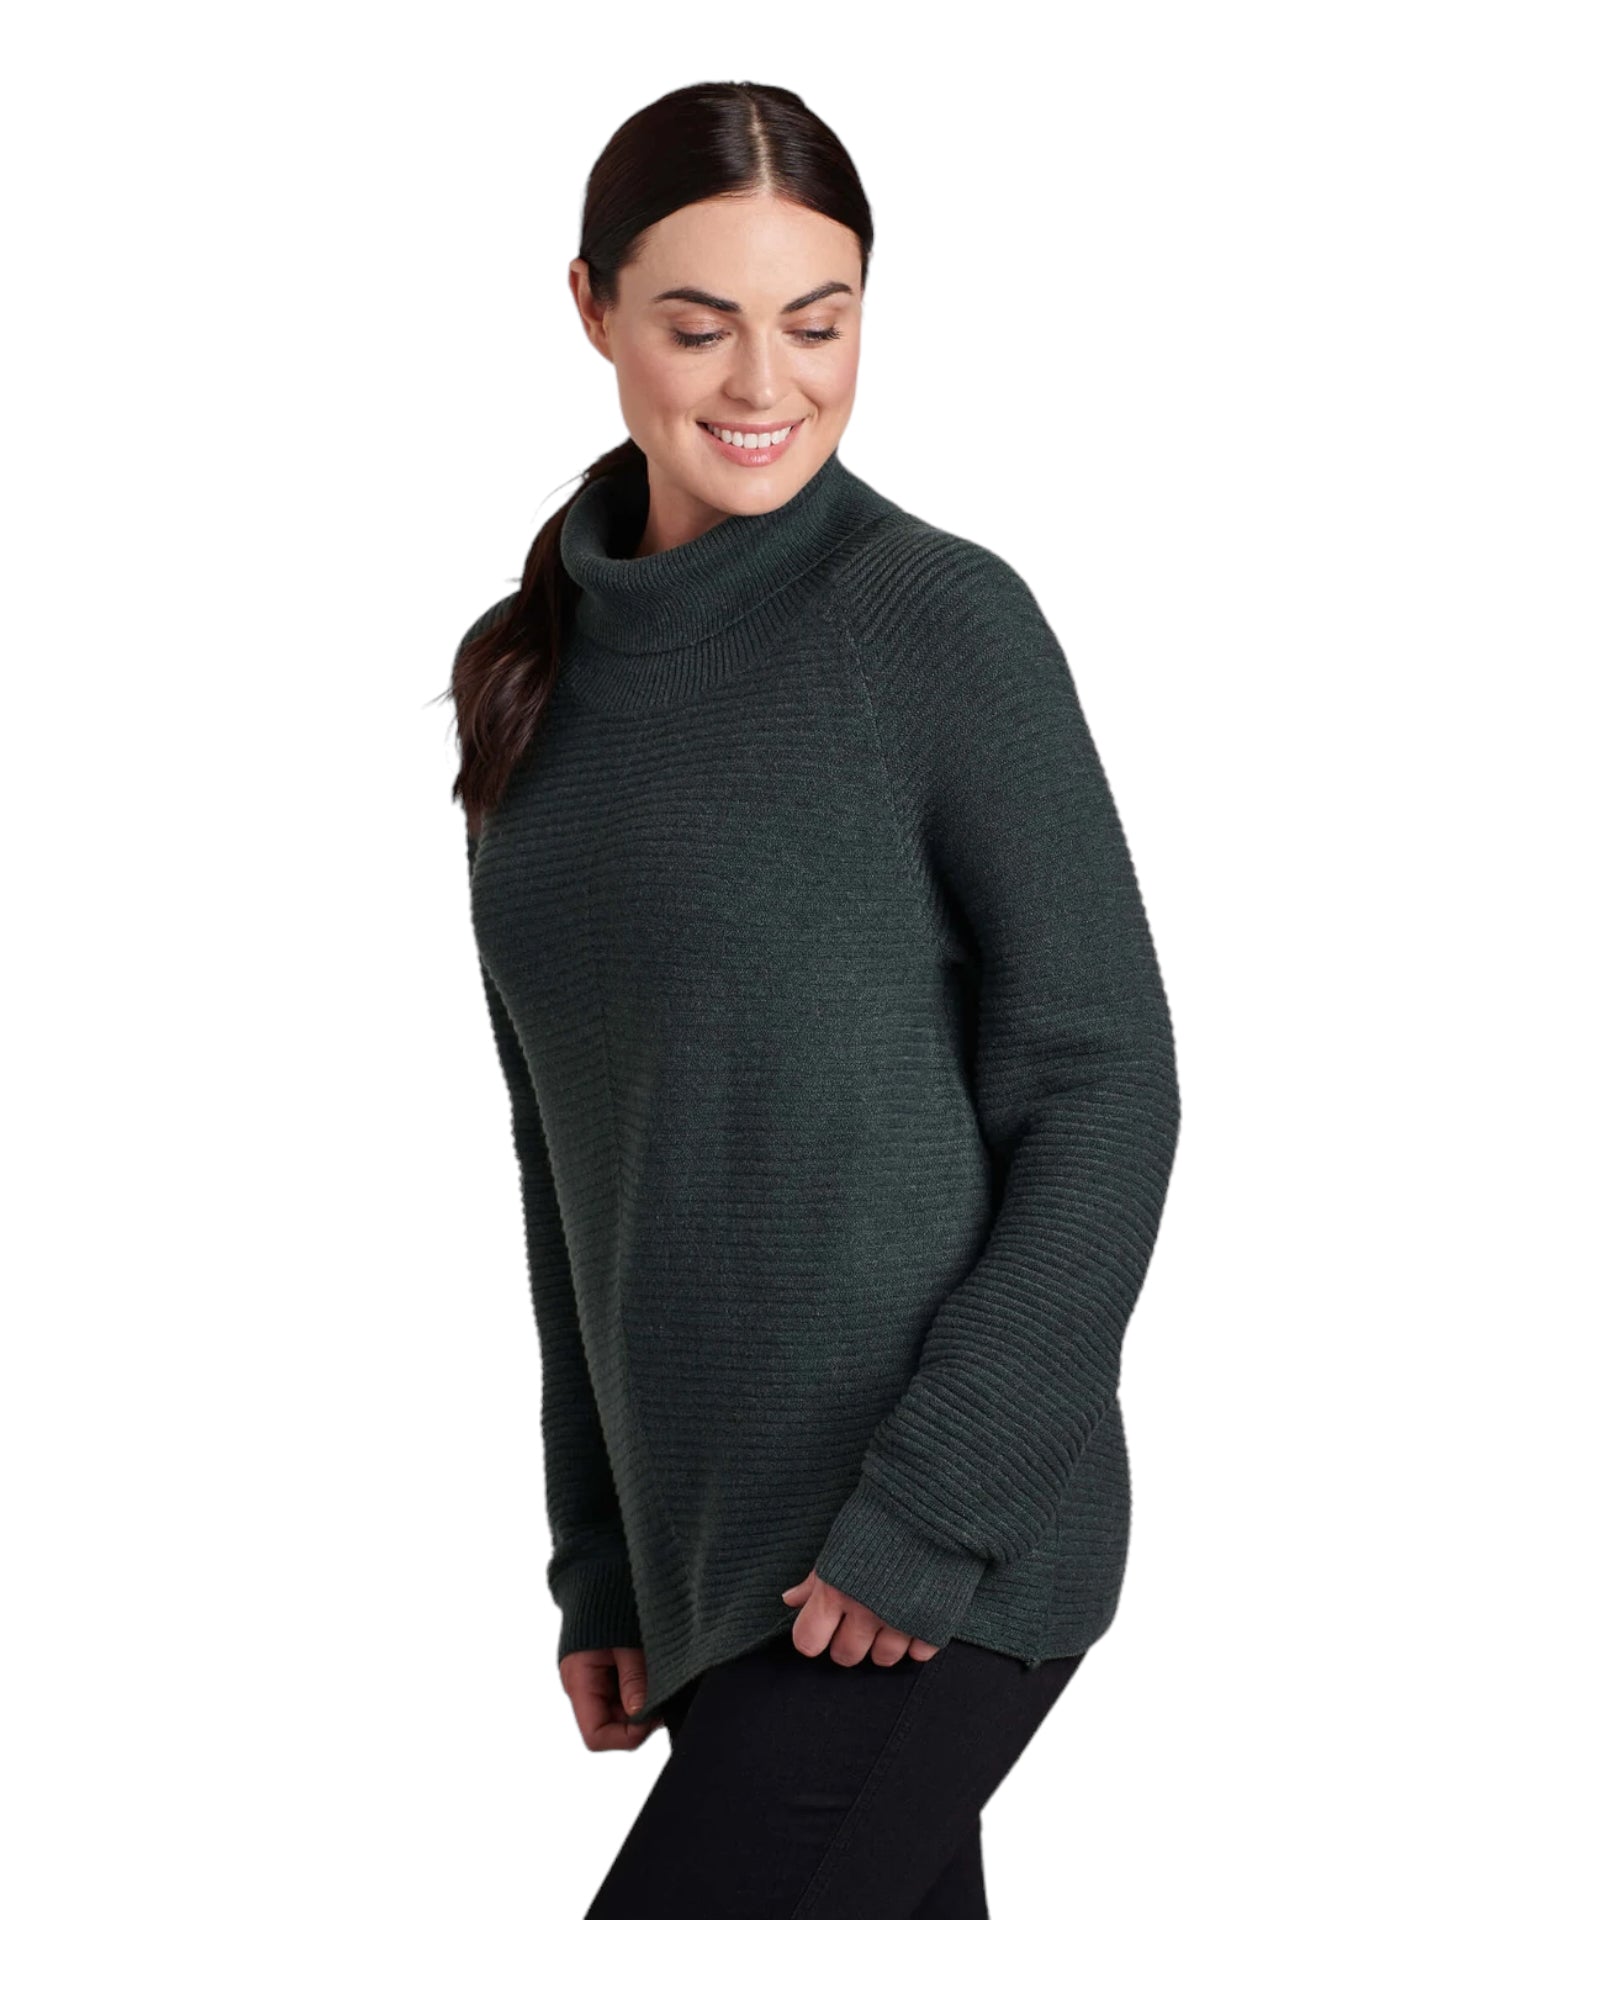 Snuggle up with SOLACE Sweater and chase away those wintery blues. With a cozy cowl neck and a flawless fit, the versatile SOLACE can transition from casual to glamorous as your occasion demands.